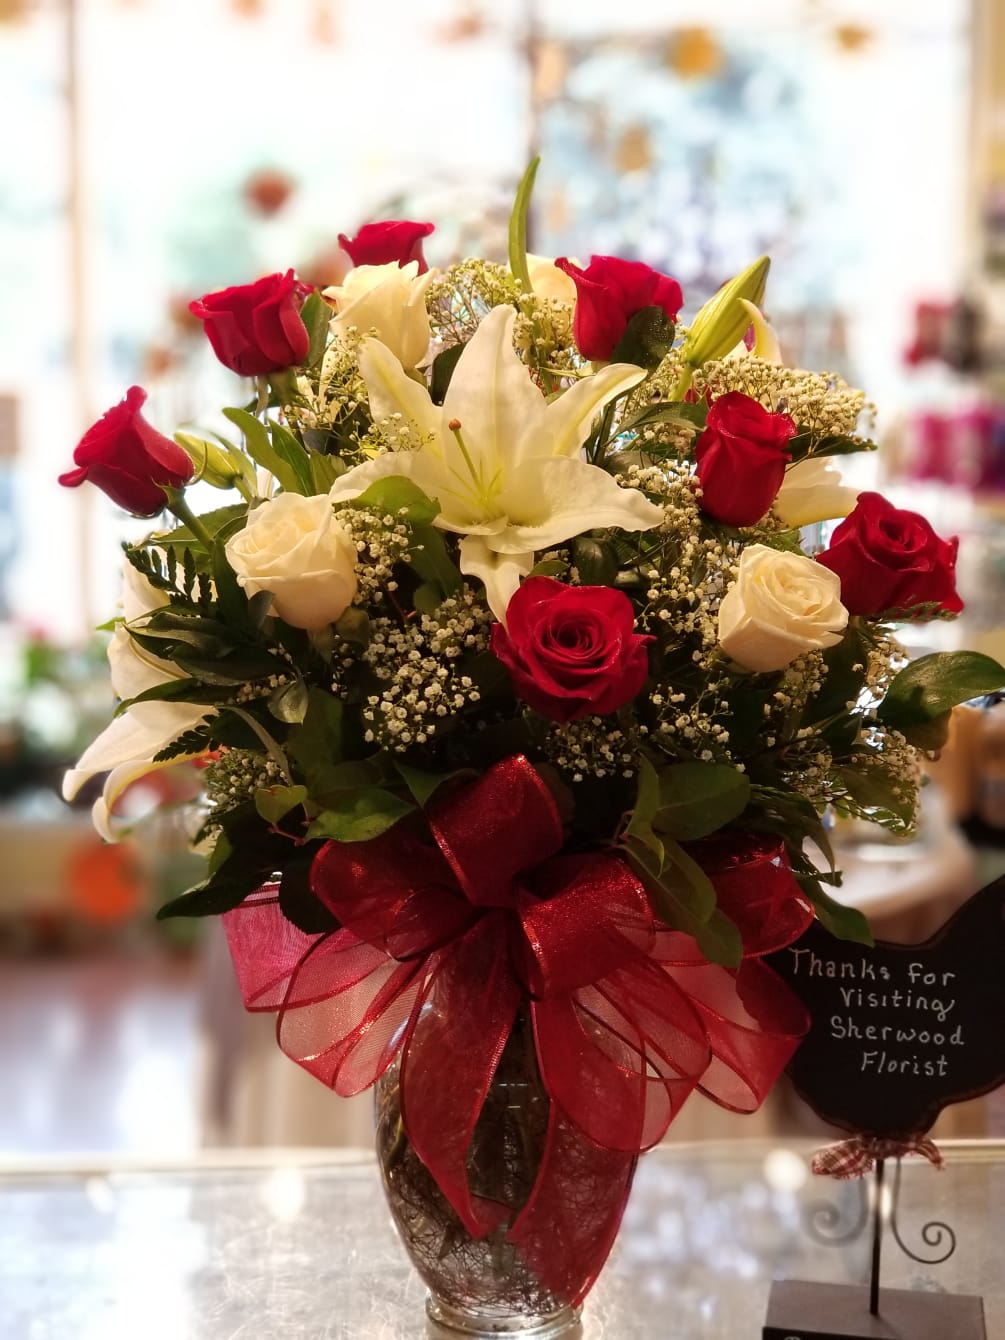 Romantic Red and White Roses Set Between Lavish Lilies and Garden Greenery